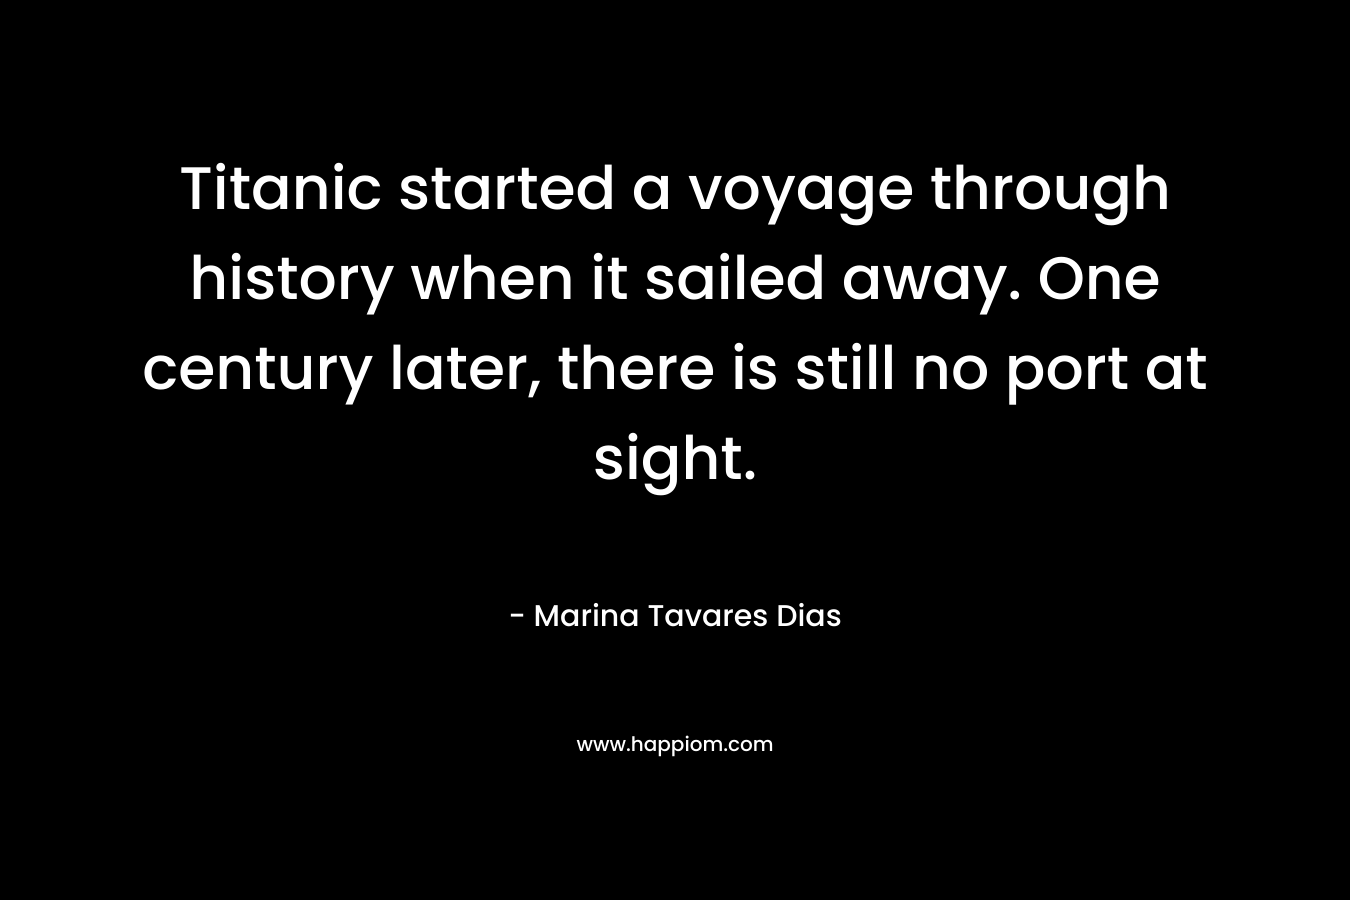 Titanic started a voyage through history when it sailed away. One century later, there is still no port at sight. – Marina Tavares Dias